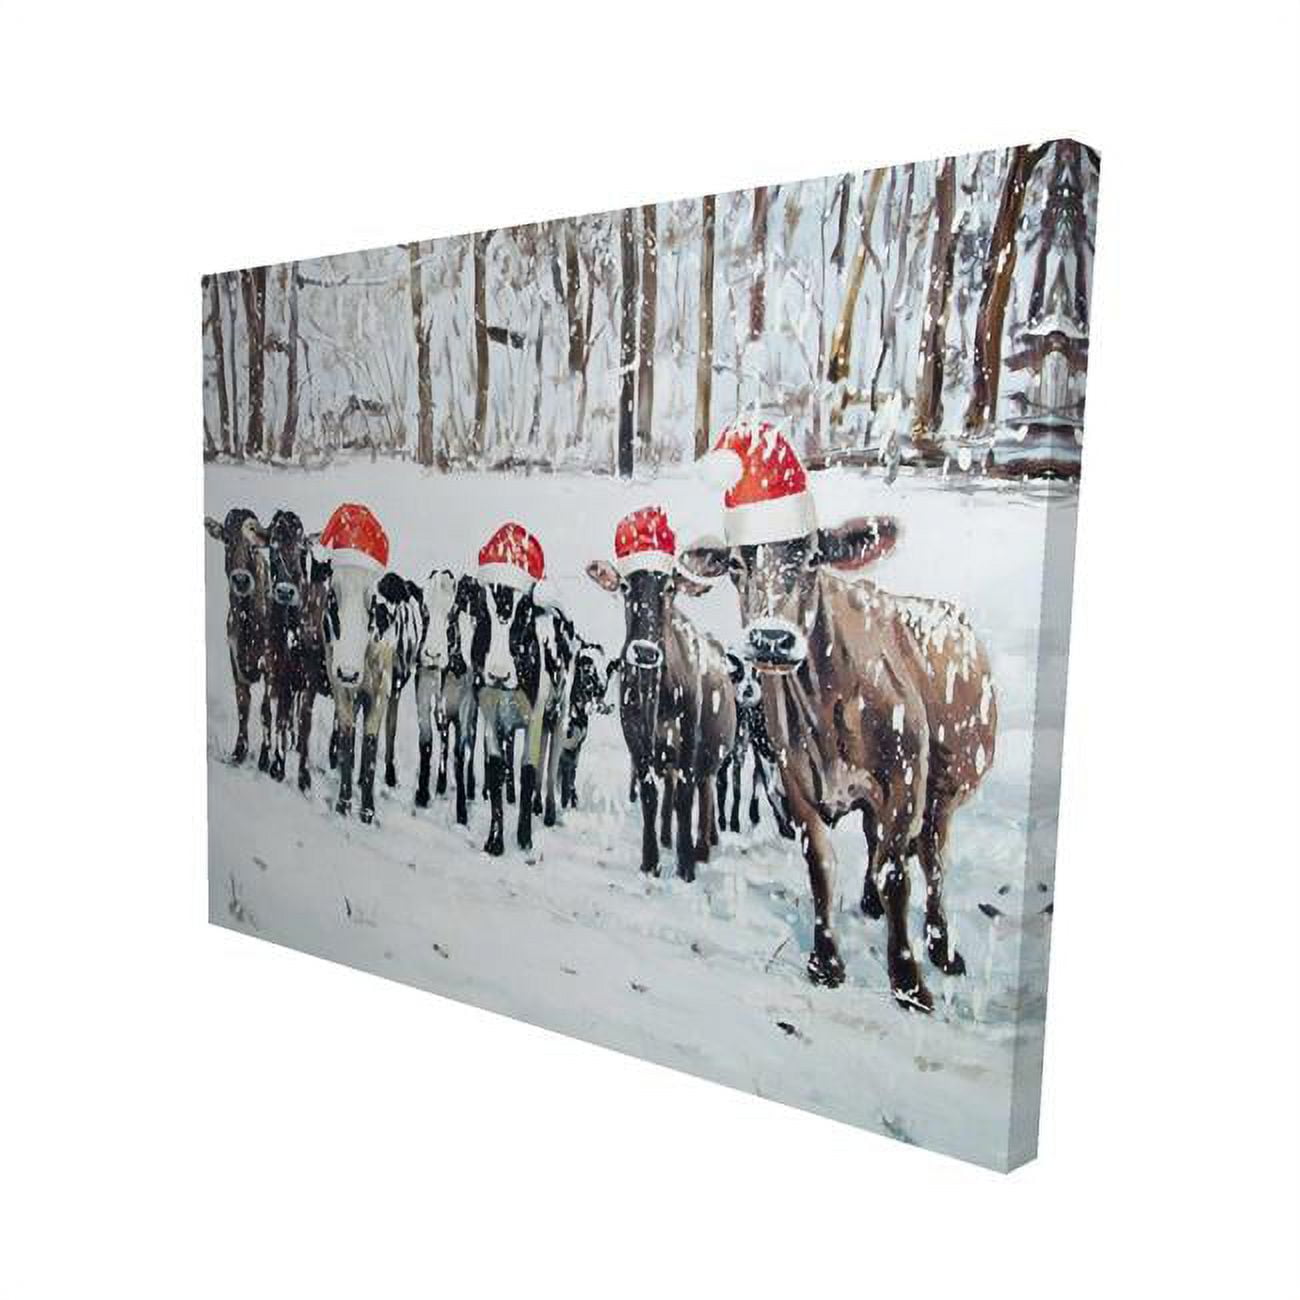 Begin Home Decor 2080-1620-HO24 16 x 20 in. Curious Christmas Cows-Print on Canvas